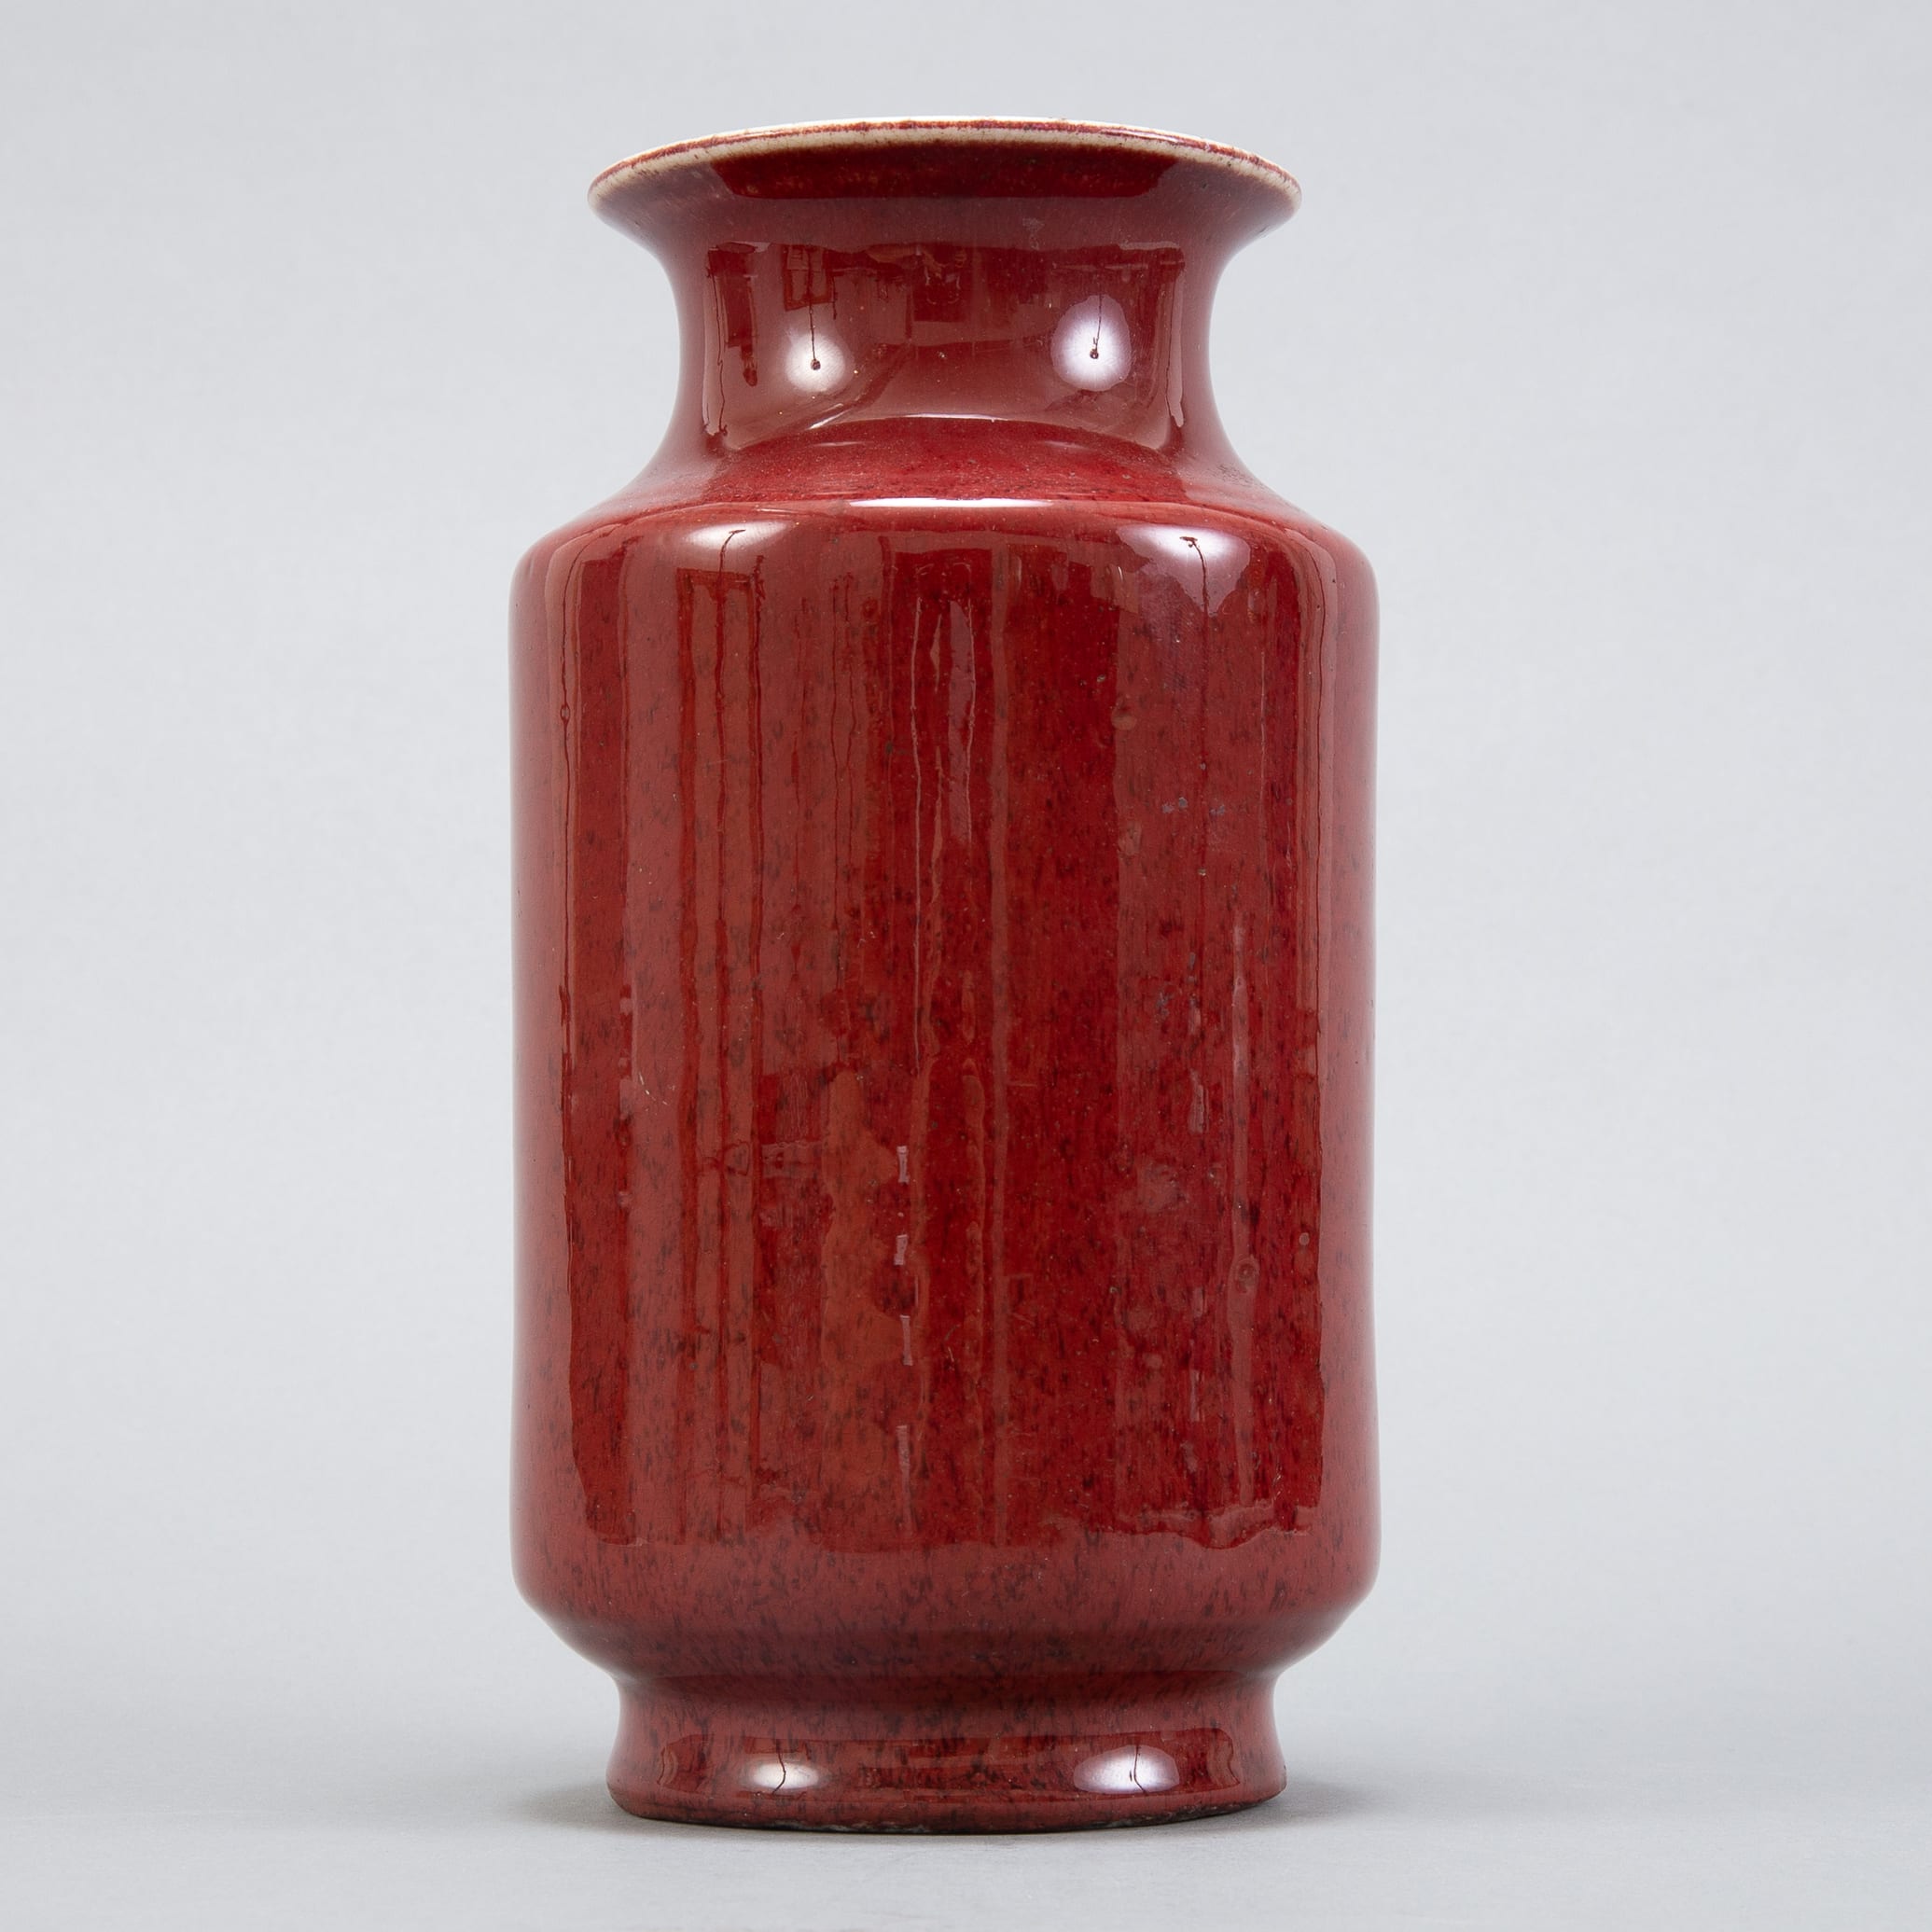 Lot 227: Chinese Oxblood  Vase w/ 6 Character Mark